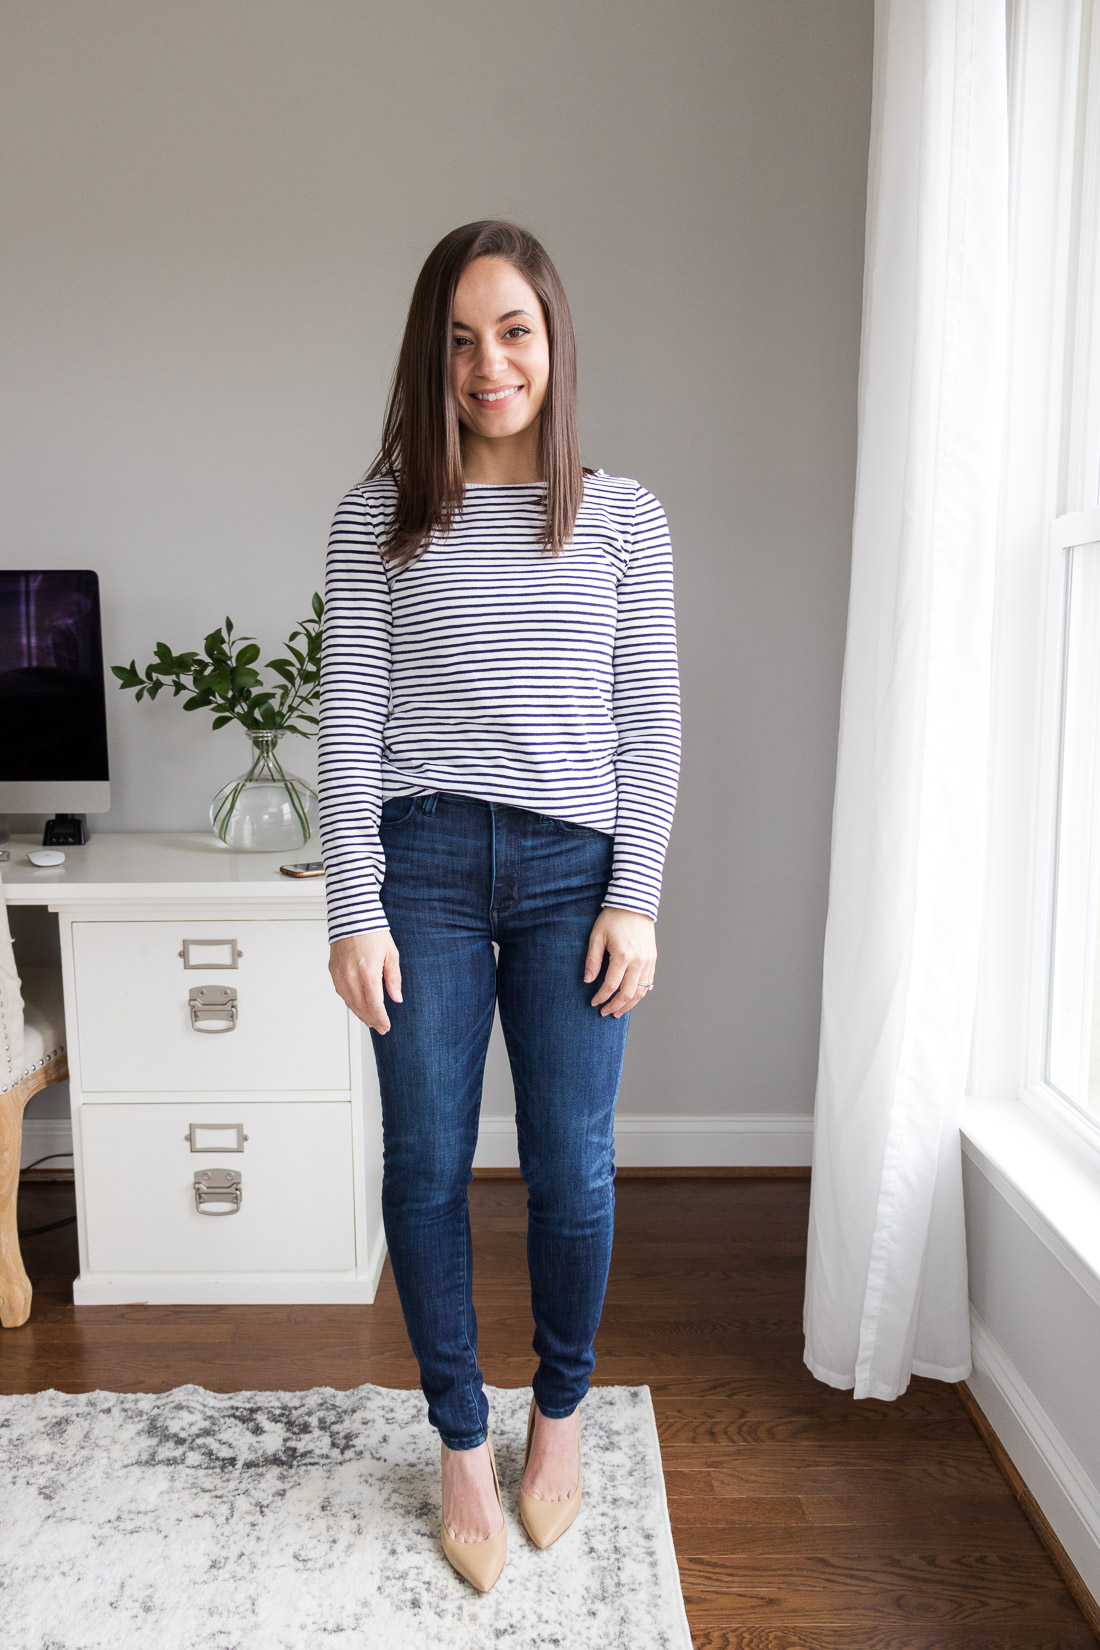 Always Closely To Nine Style Tips: Styling Tips: How to Make Short Legs Look Longer | Petite Style